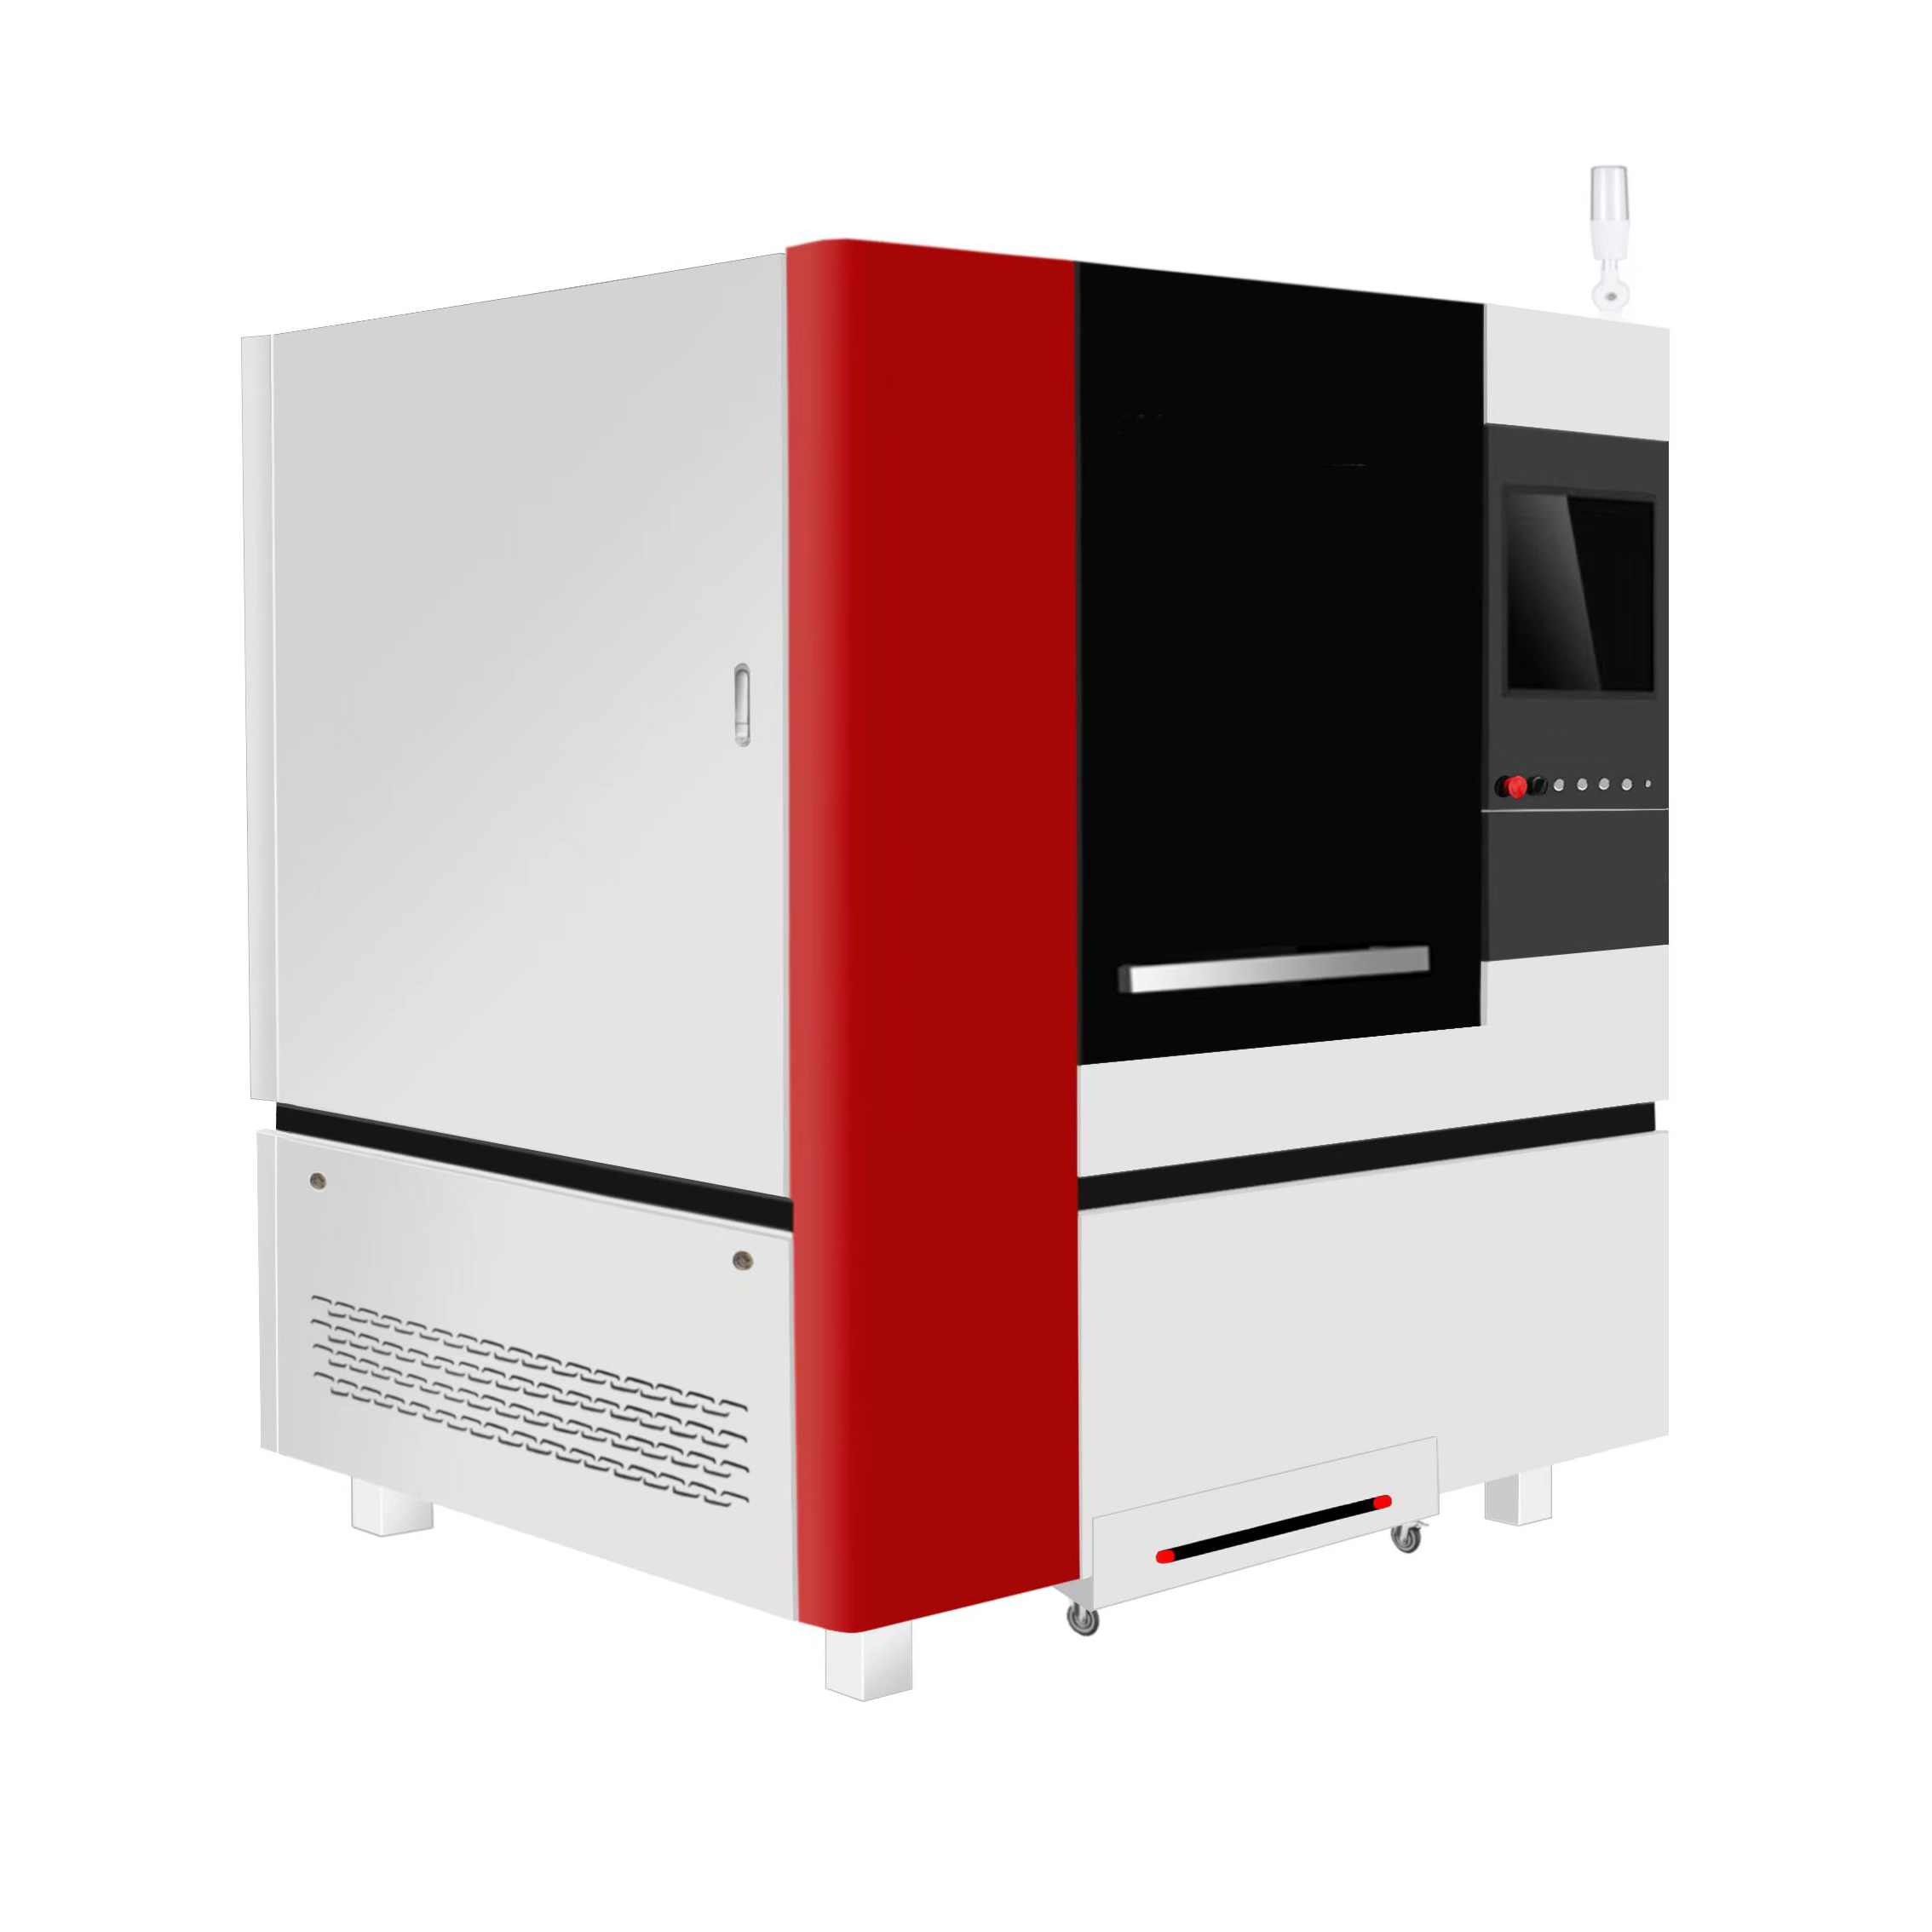 Laser cutting machines are widely used in Steel and metallurgy industry